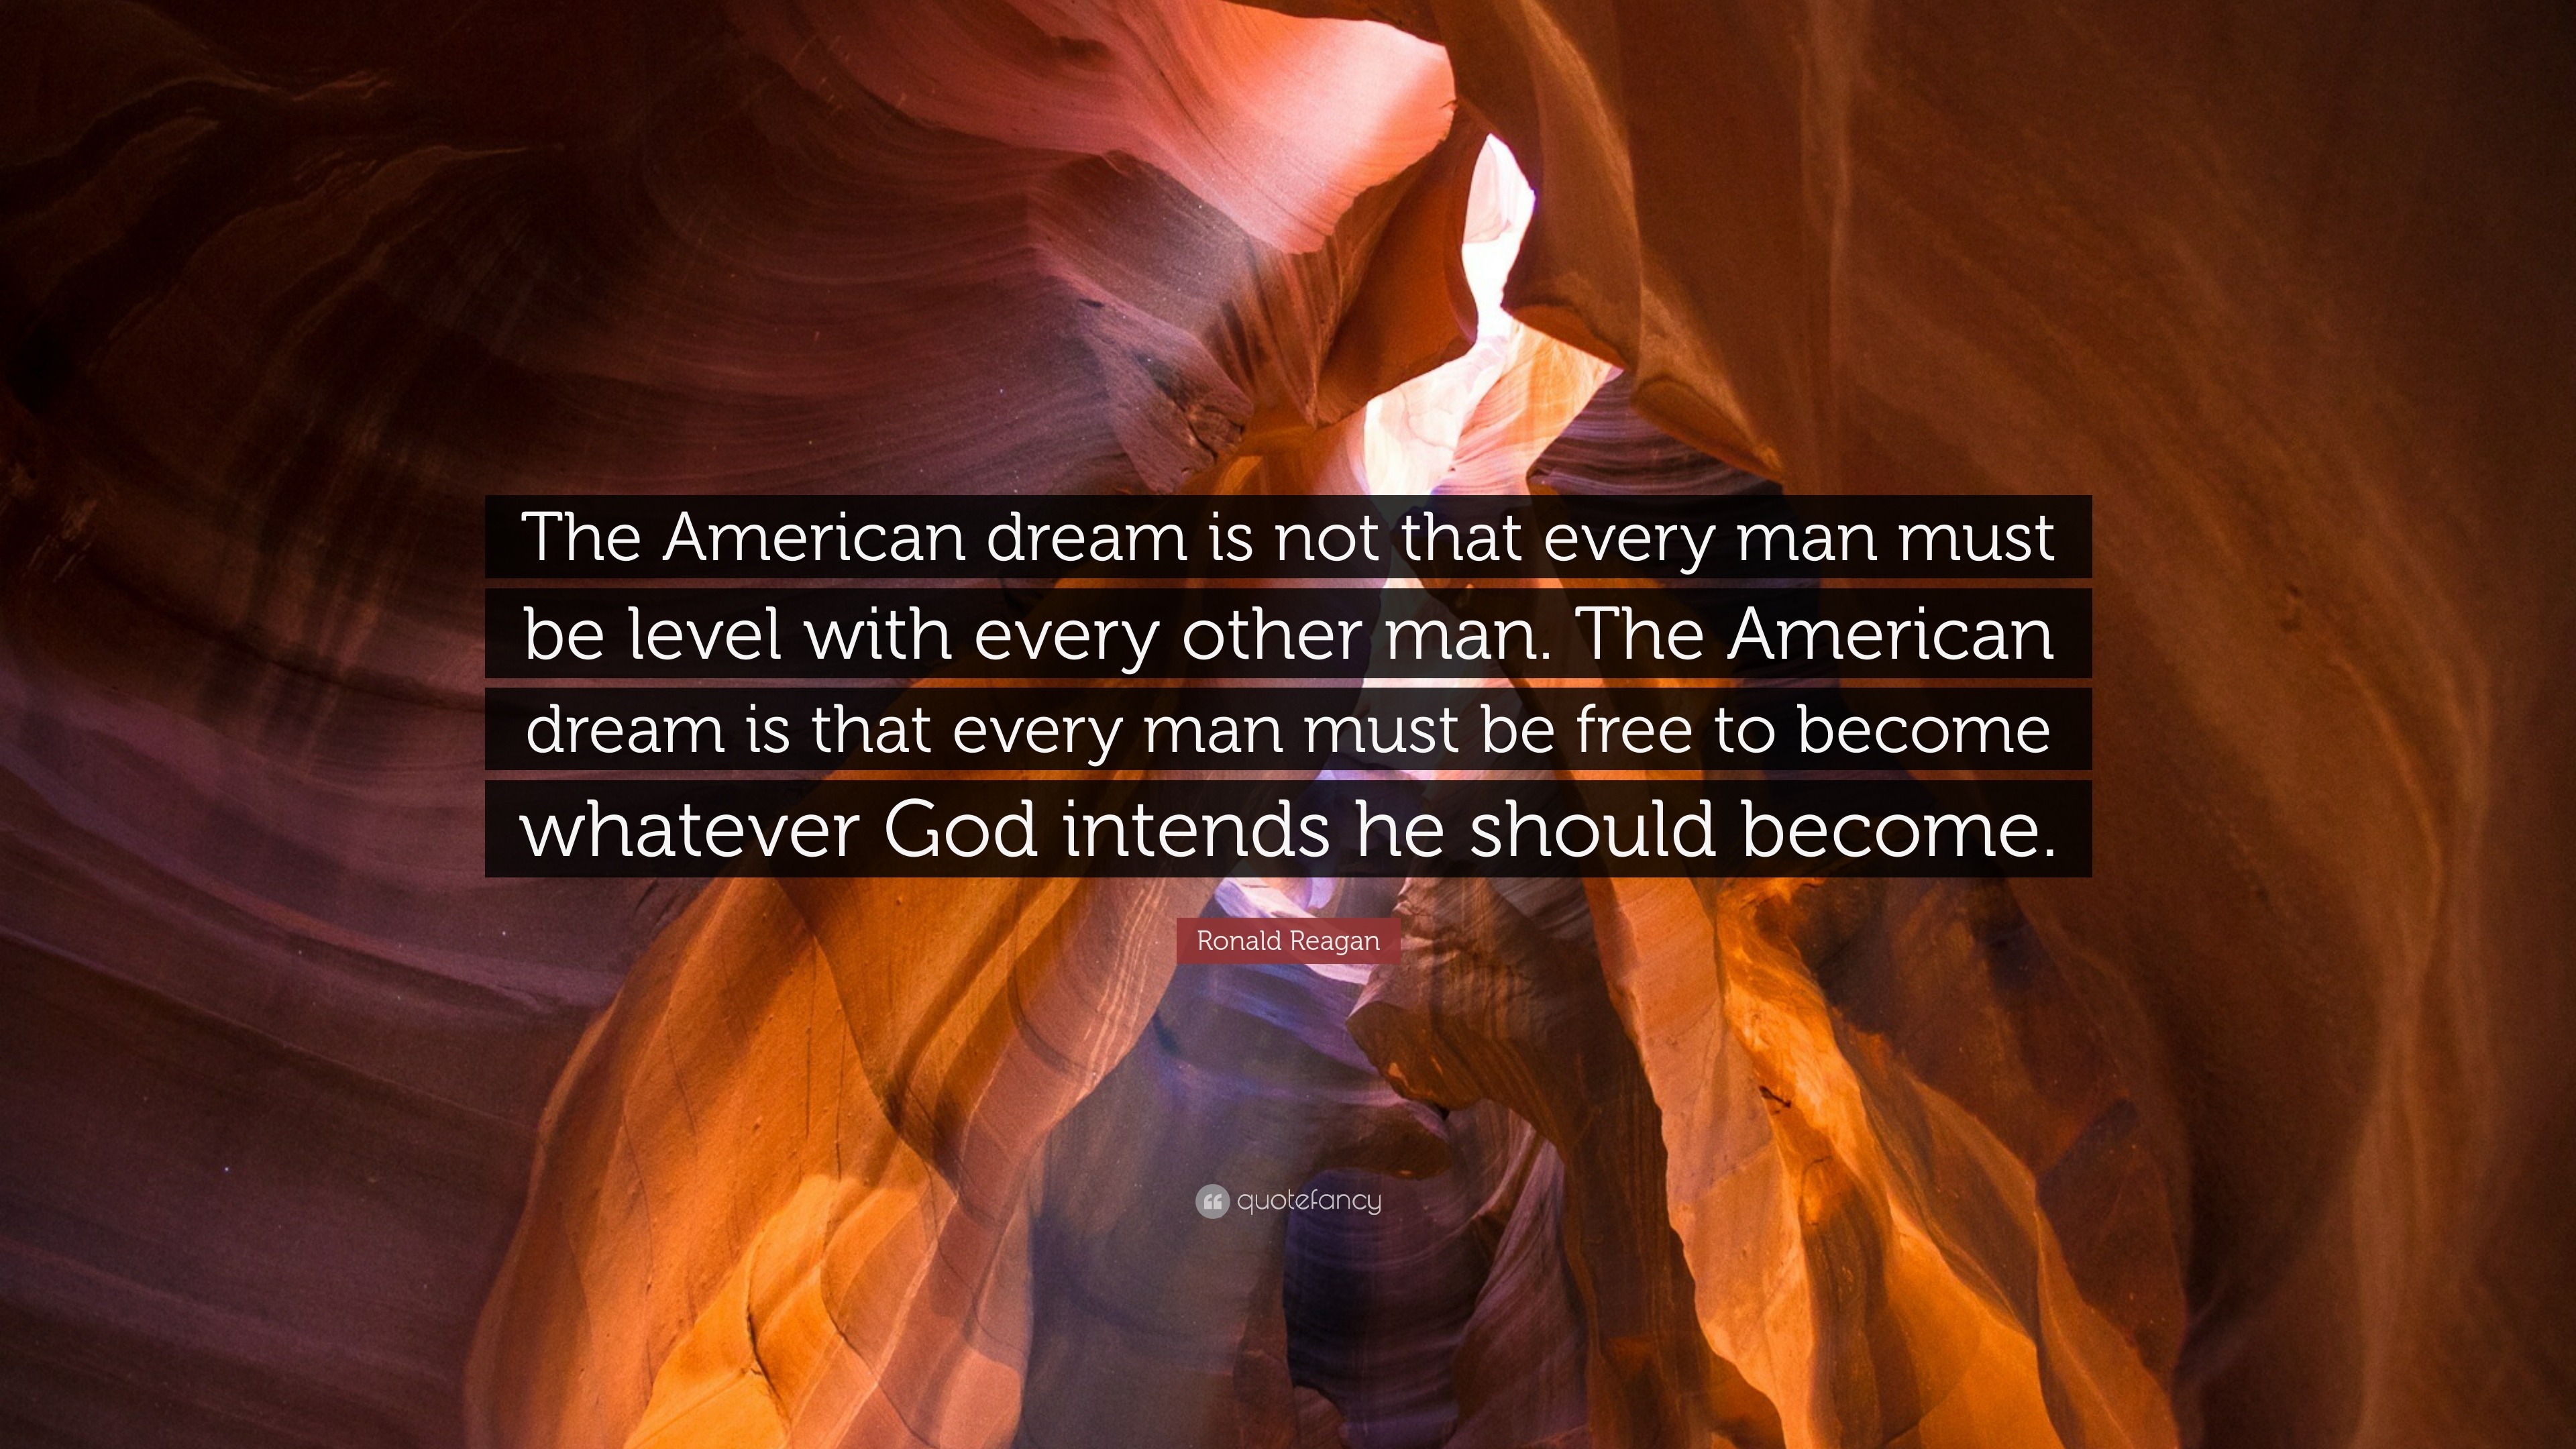 1721123 Ronald Reagan Quote The American dream is not that every man must